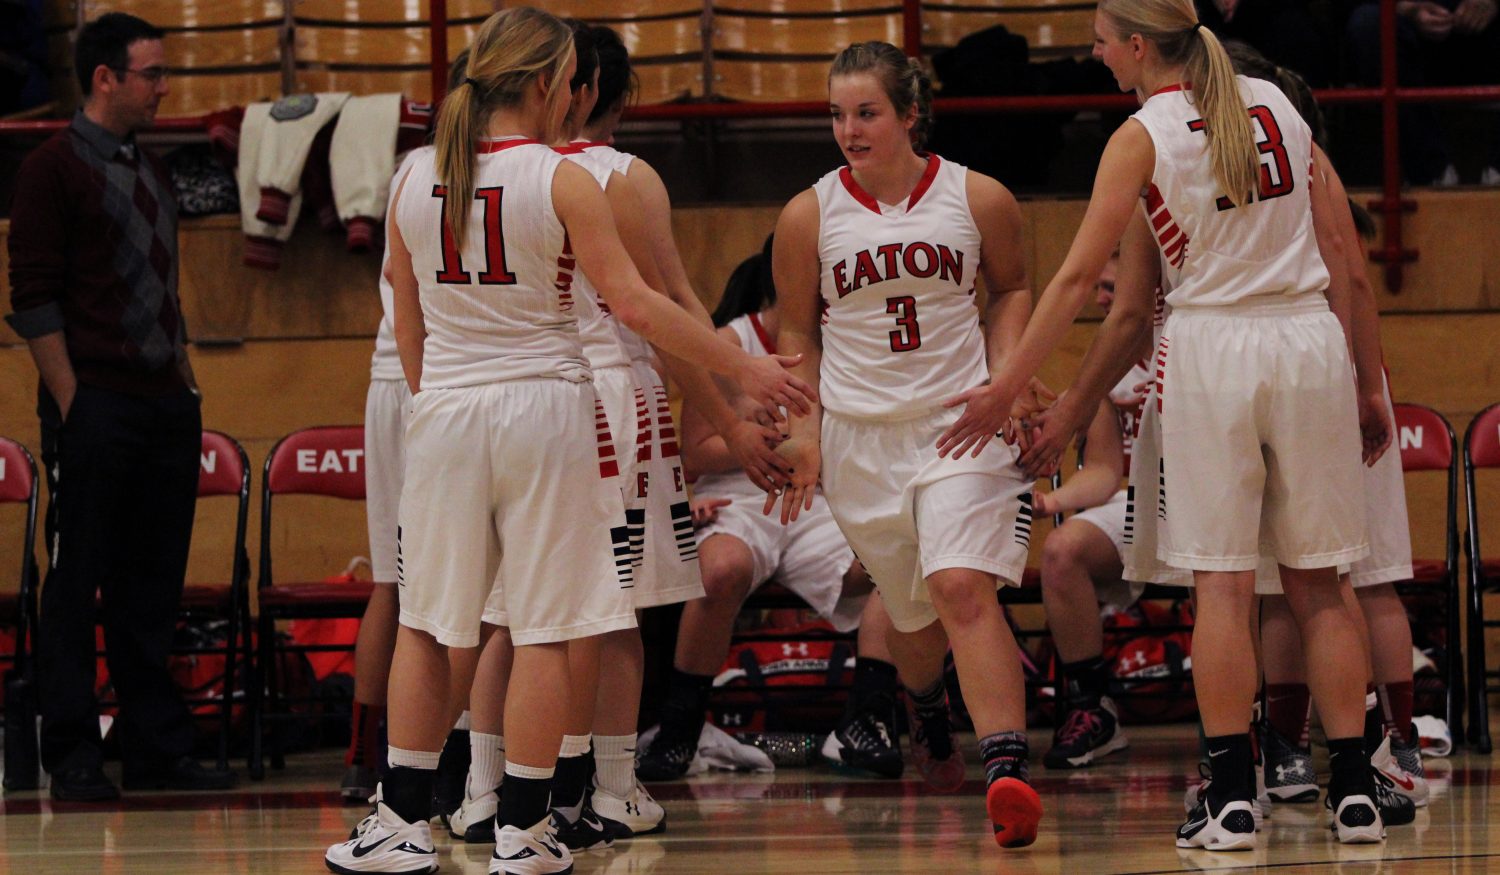 Bailey Jones high fives her teammates as a starter in the game. 